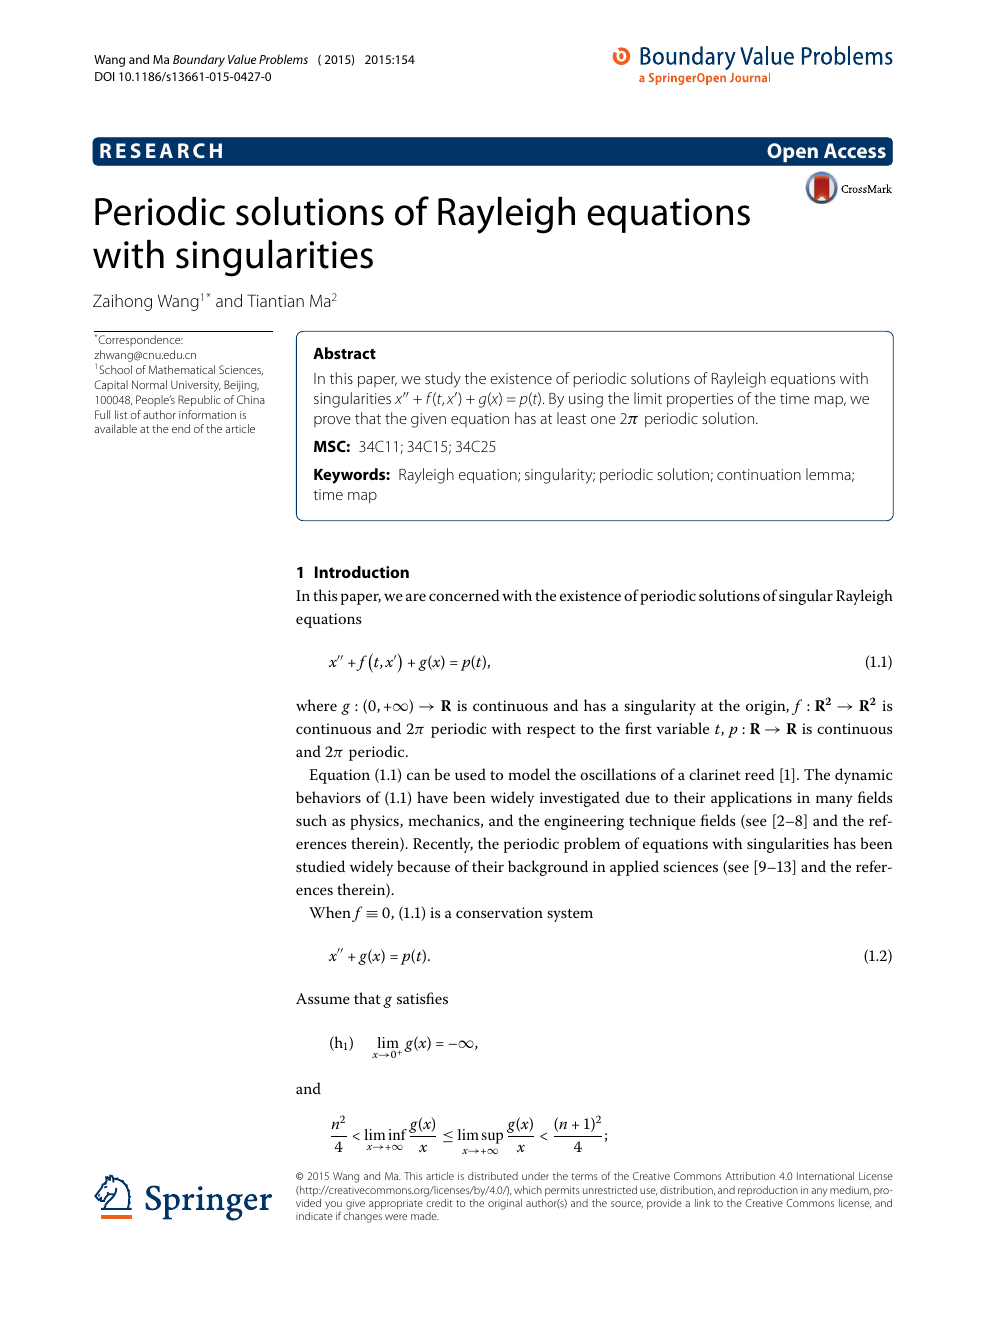 Periodic Solutions Of Rayleigh Equations With Singularities Topic Of Research Paper In Mathematics Download Scholarly Article Pdf And Read For Free On Cyberleninka Open Science Hub